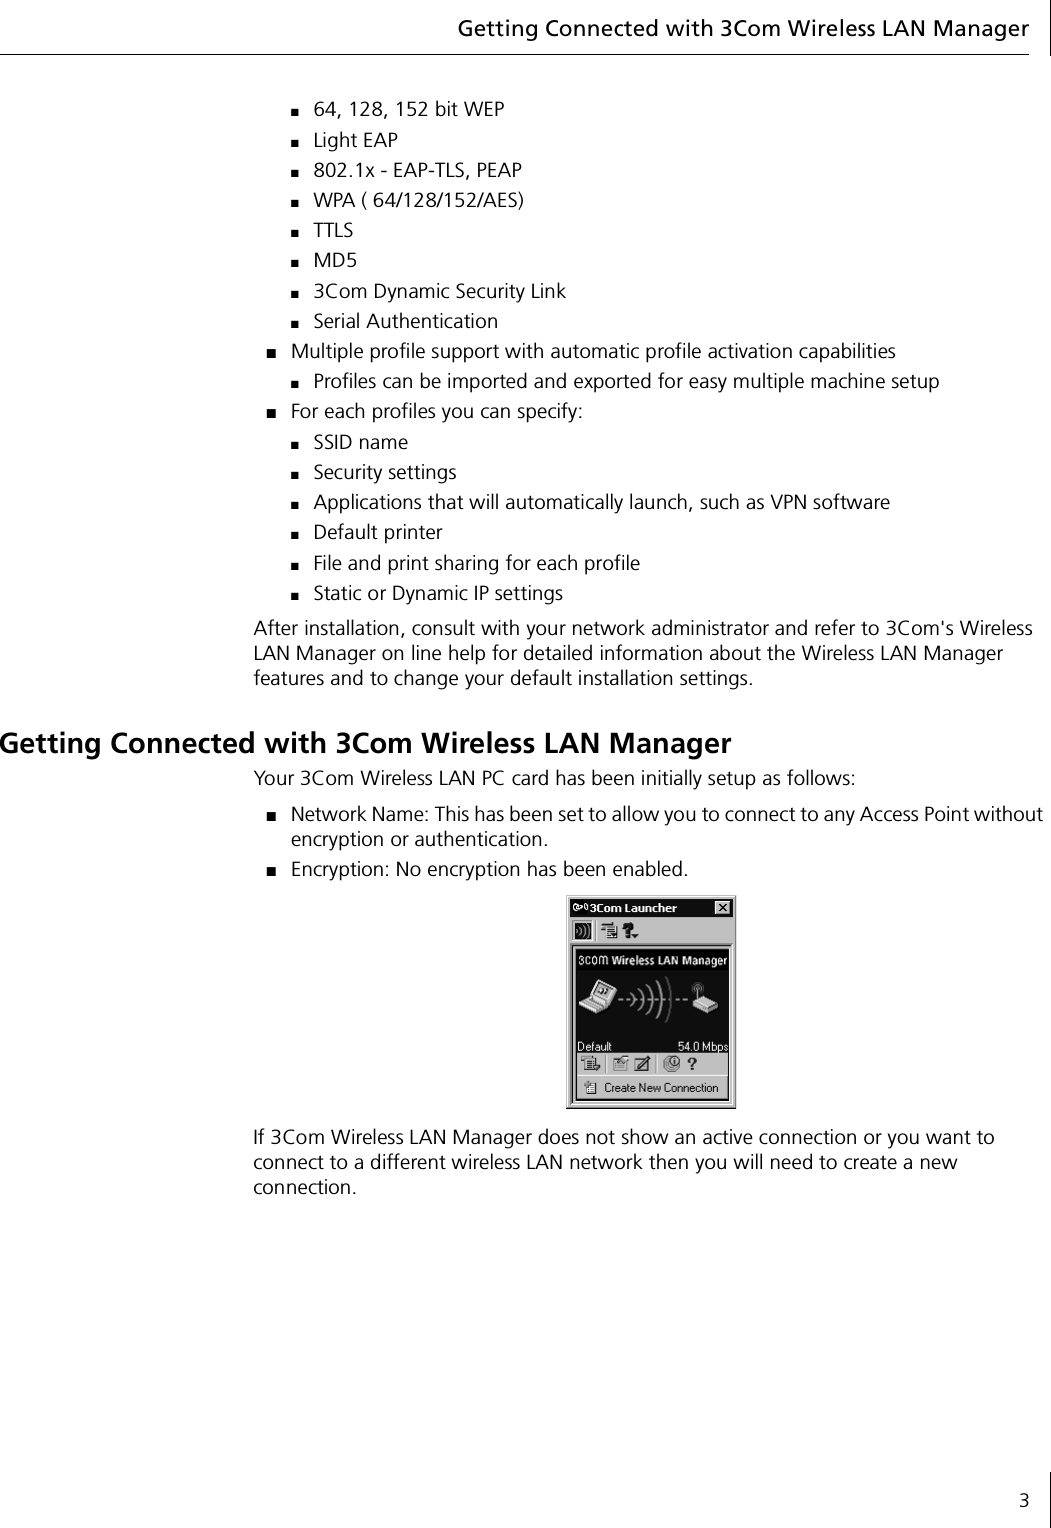 Getting Connected with 3Com Wireless LAN Manager3■64, 128, 152 bit WEP■Light EAP■802.1x - EAP-TLS, PEAP■WPA ( 64/128/152/AES)■TTLS■MD5■3Com Dynamic Security Link■Serial Authentication■Multiple profile support with automatic profile activation capabilities■Profiles can be imported and exported for easy multiple machine setup■For each profiles you can specify:■SSID name■Security settings■Applications that will automatically launch, such as VPN software■Default printer ■File and print sharing for each profile■Static or Dynamic IP settingsAfter installation, consult with your network administrator and refer to 3Com&apos;s Wireless LAN Manager on line help for detailed information about the Wireless LAN Manager features and to change your default installation settings.Getting Connected with 3Com Wireless LAN ManagerYour 3Com Wireless LAN PC card has been initially setup as follows:■Network Name: This has been set to allow you to connect to any Access Point without encryption or authentication.■Encryption: No encryption has been enabled.If 3Com Wireless LAN Manager does not show an active connection or you want to connect to a different wireless LAN network then you will need to create a new connection.